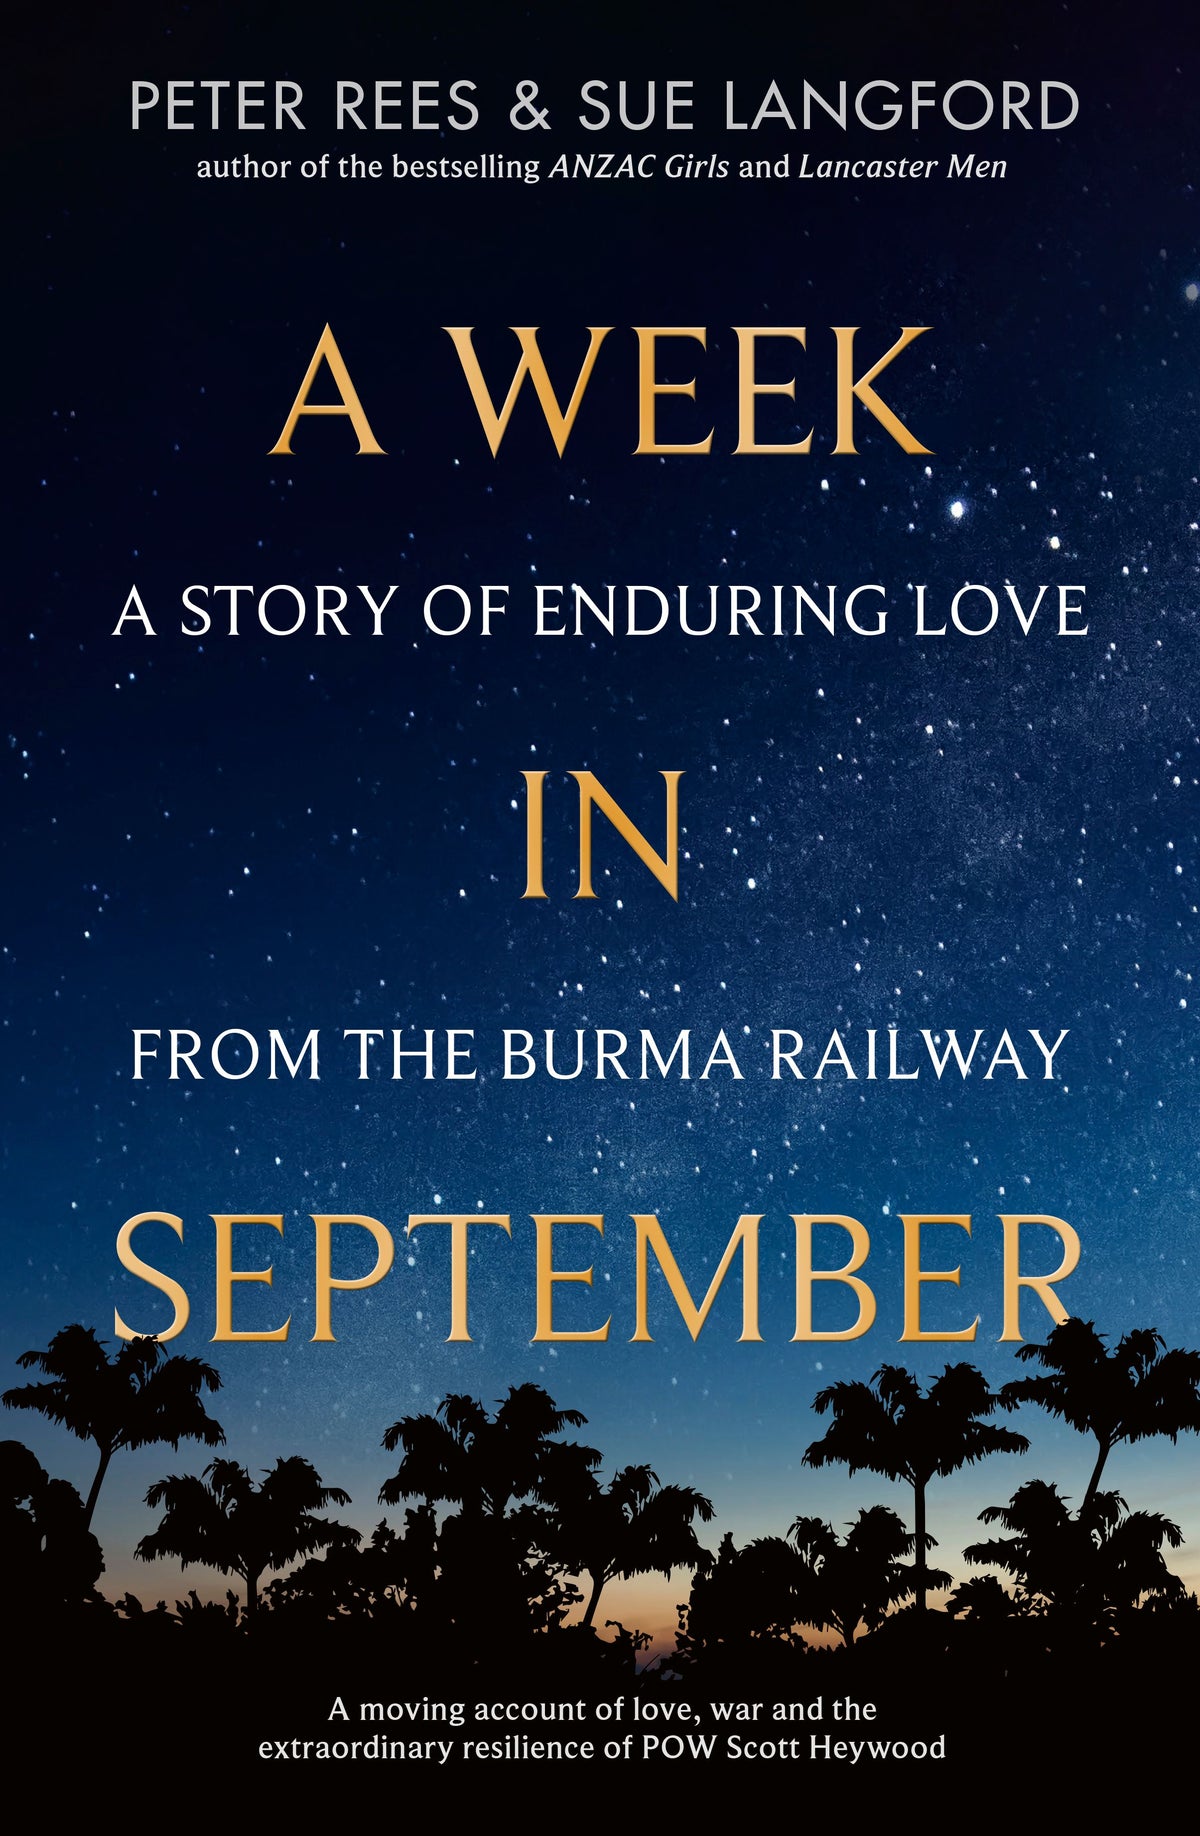 A Week in September: A story of enduring love from the Burma Railway by Peter Rees, Sue Langford